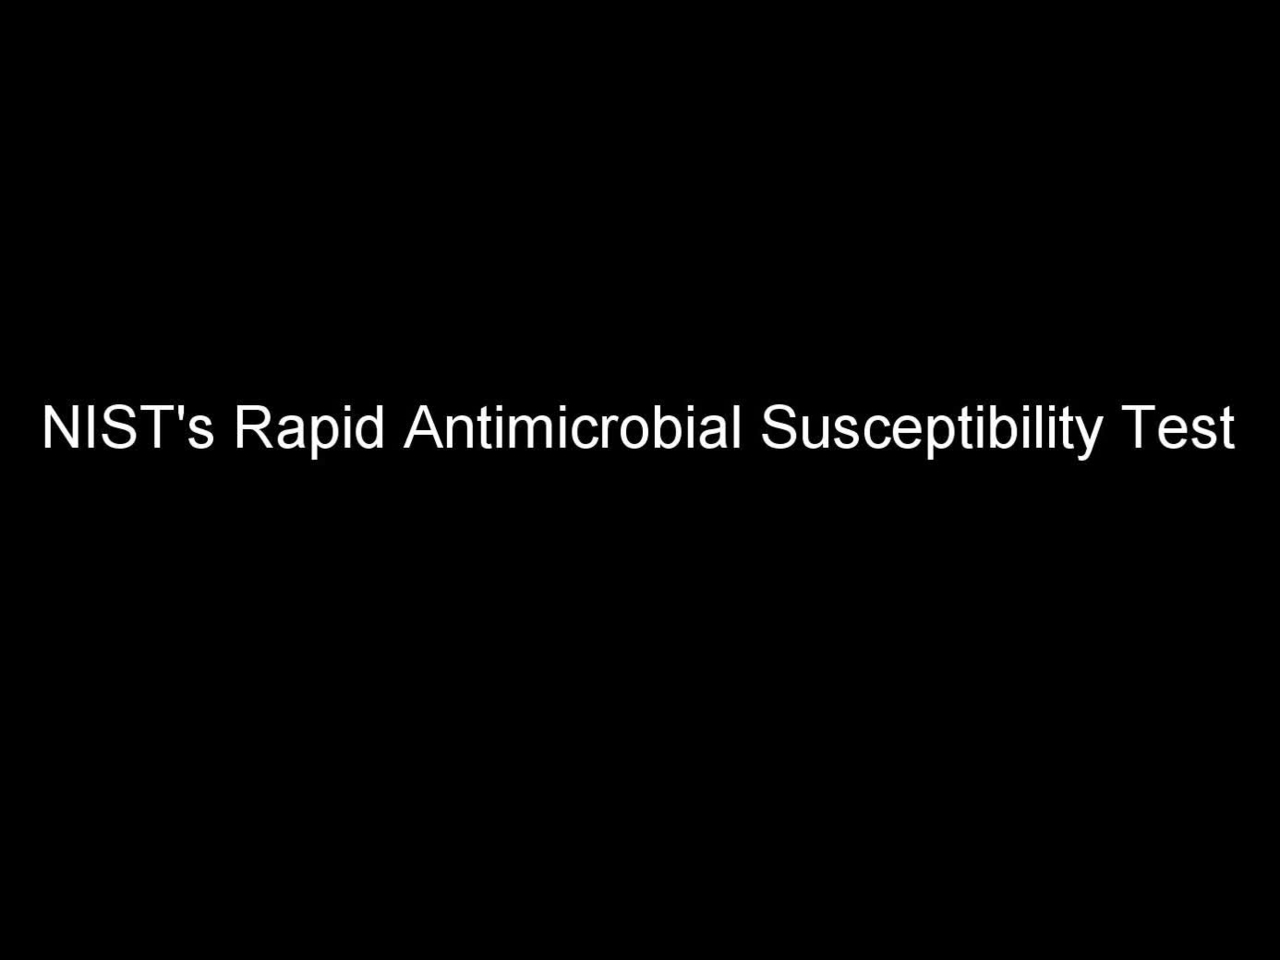 NIST’s Rapid Antimicrobial Susceptibility Test